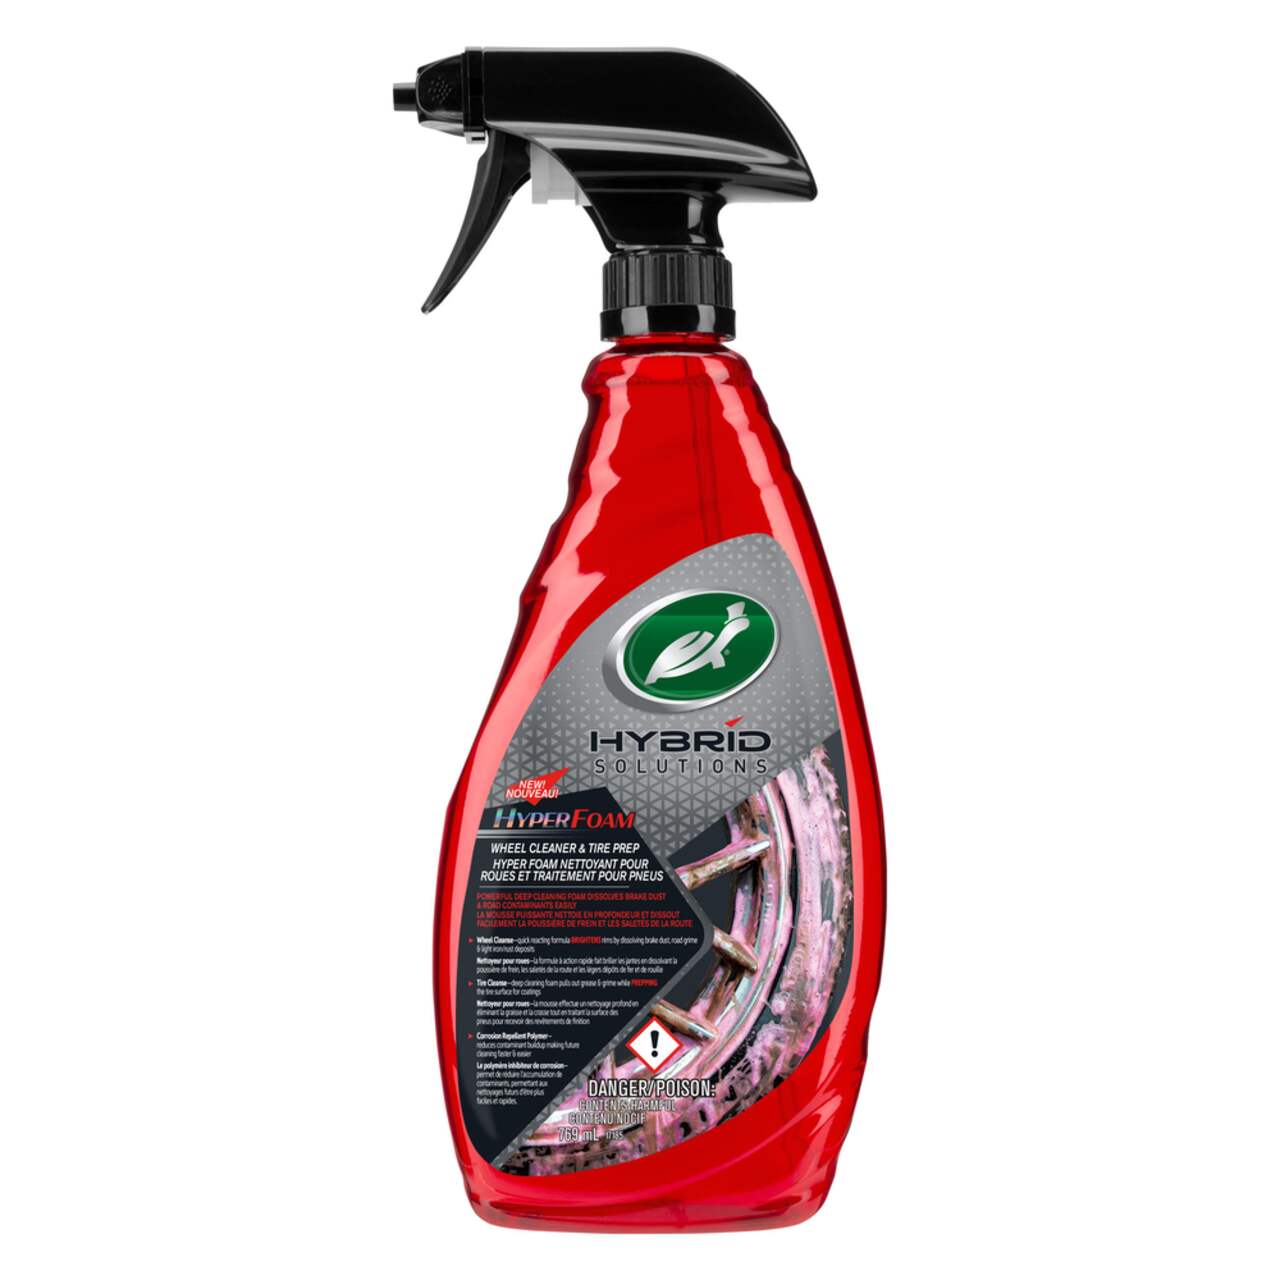 https://media-www.canadiantire.ca/product/automotive/car-care-accessories/auto-cleaning-chemicals/0393665/turtle-wax-hybrid-solutions-wheel-cleaner-769ml-f153da7c-1f57-47a3-851a-581d29efcdfc.png?imdensity=1&imwidth=640&impolicy=mZoom